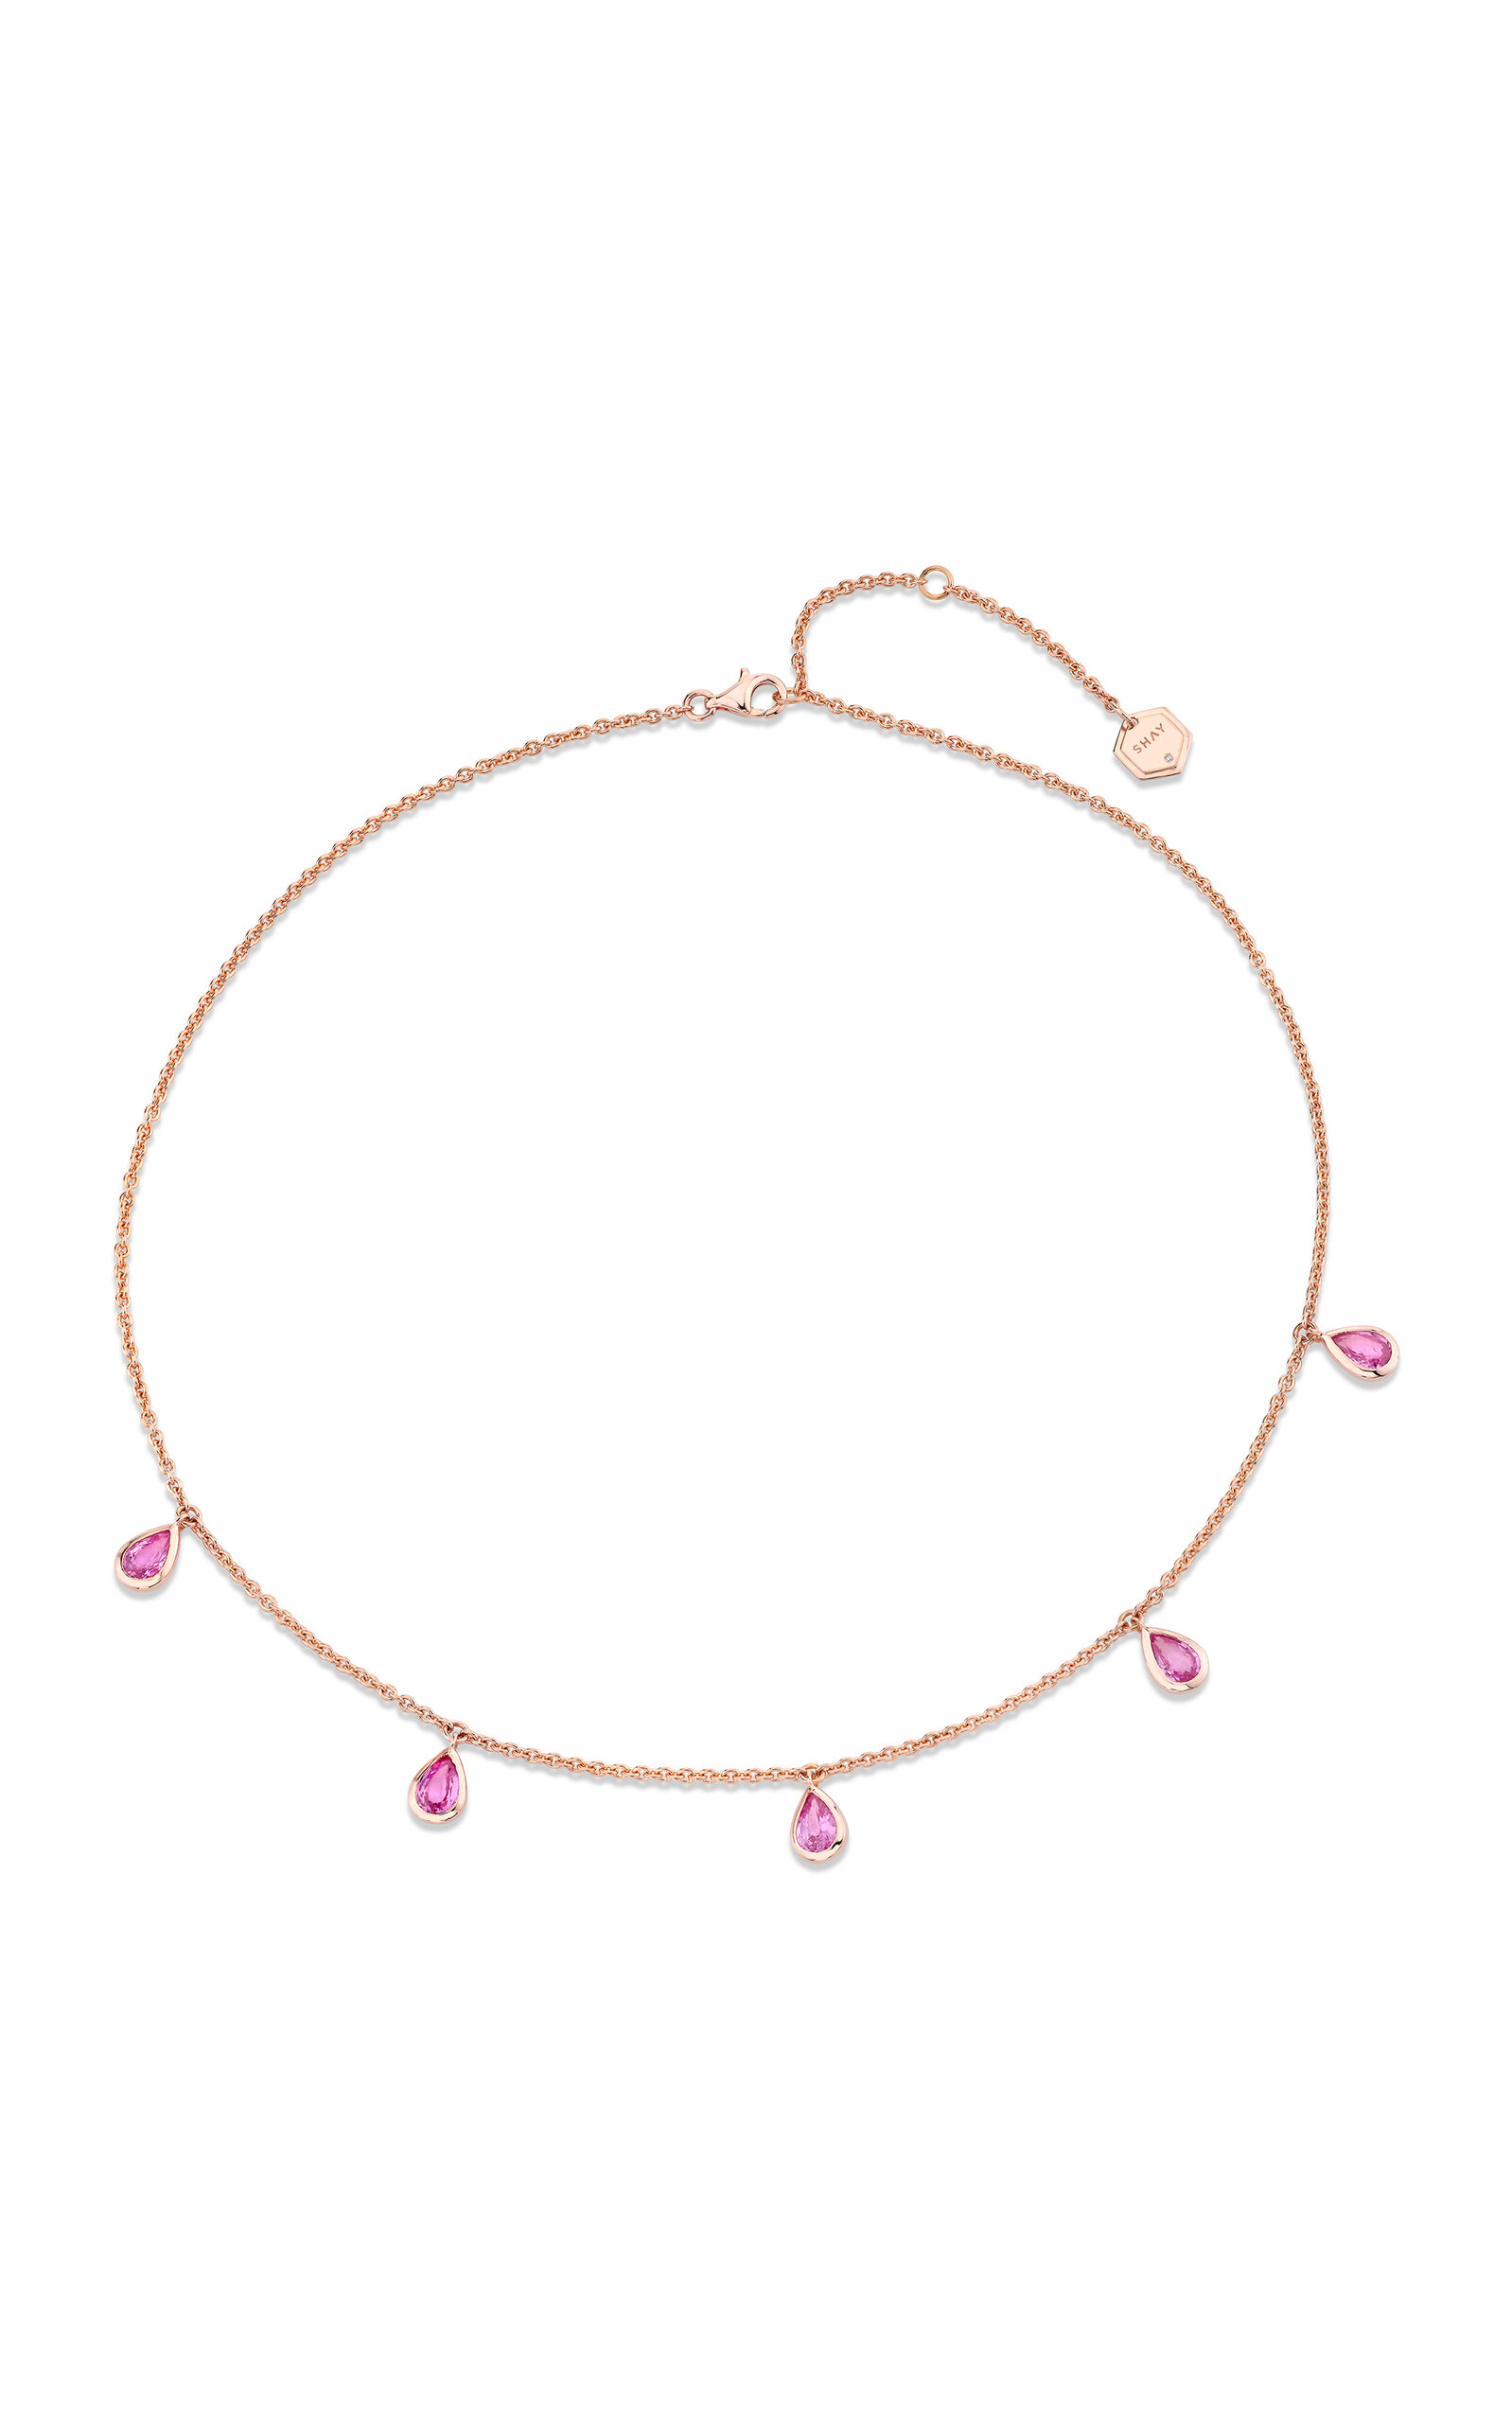 SHAY - Elements 18K Rose Gold Sapphire Necklace - Pink - OS - Moda Operandi - Gifts For Her